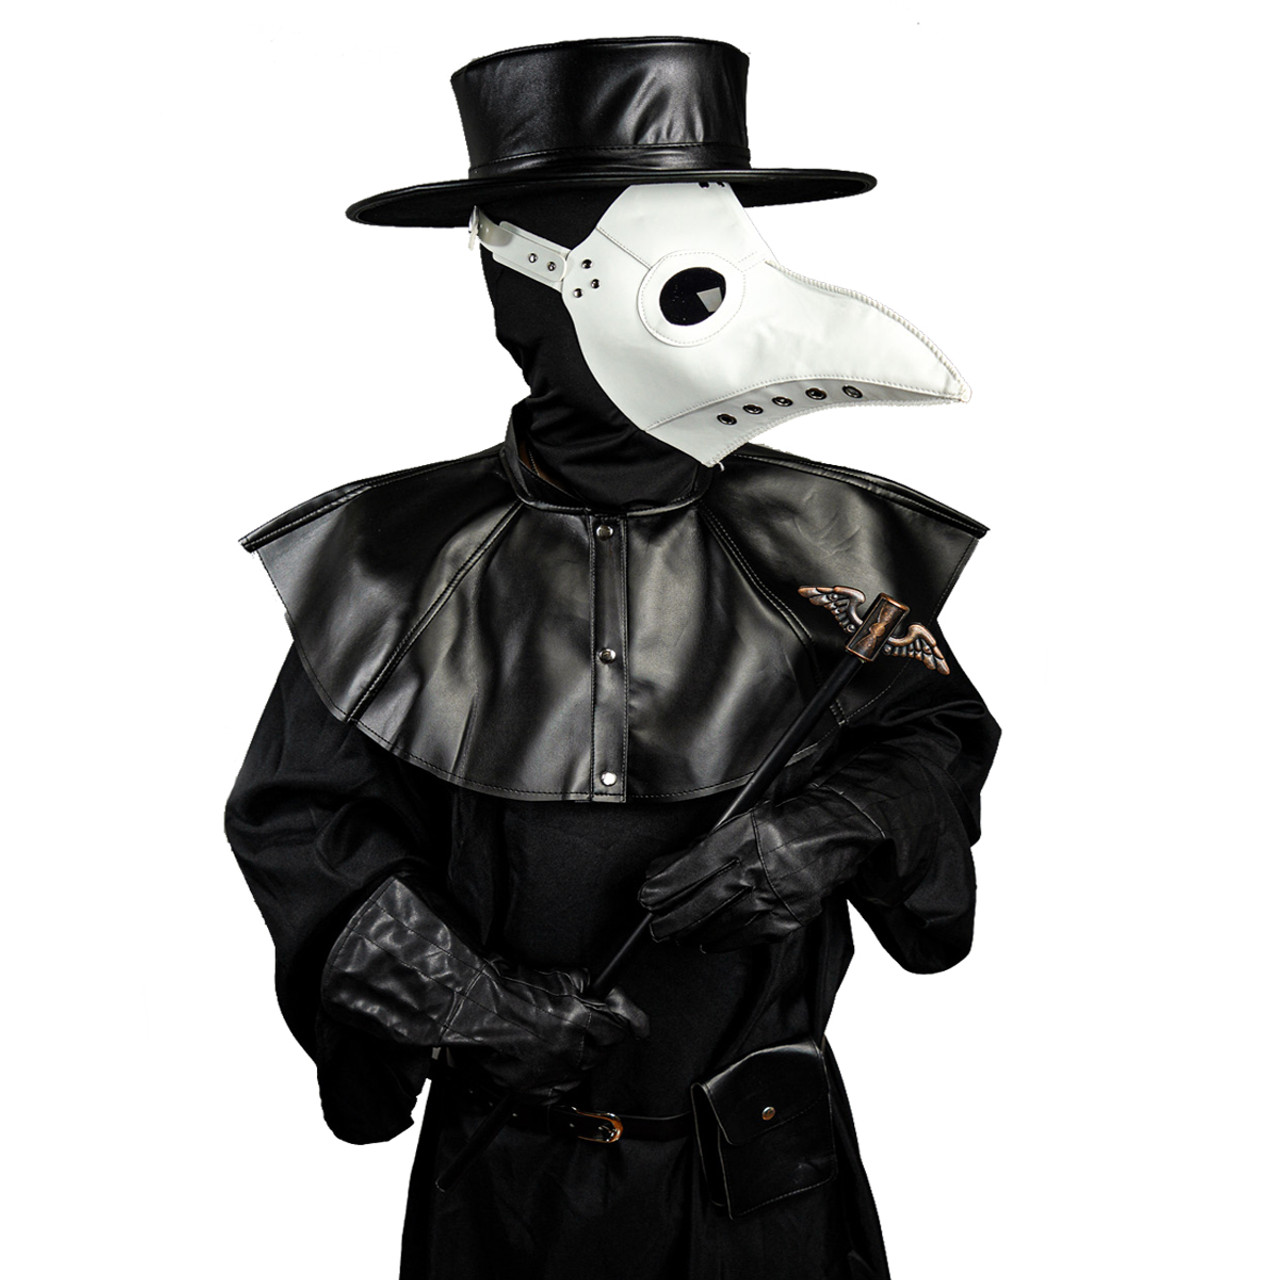 2020 Plague Doctor Costume Mask Dress Hat Cosplay US FREE SHIP